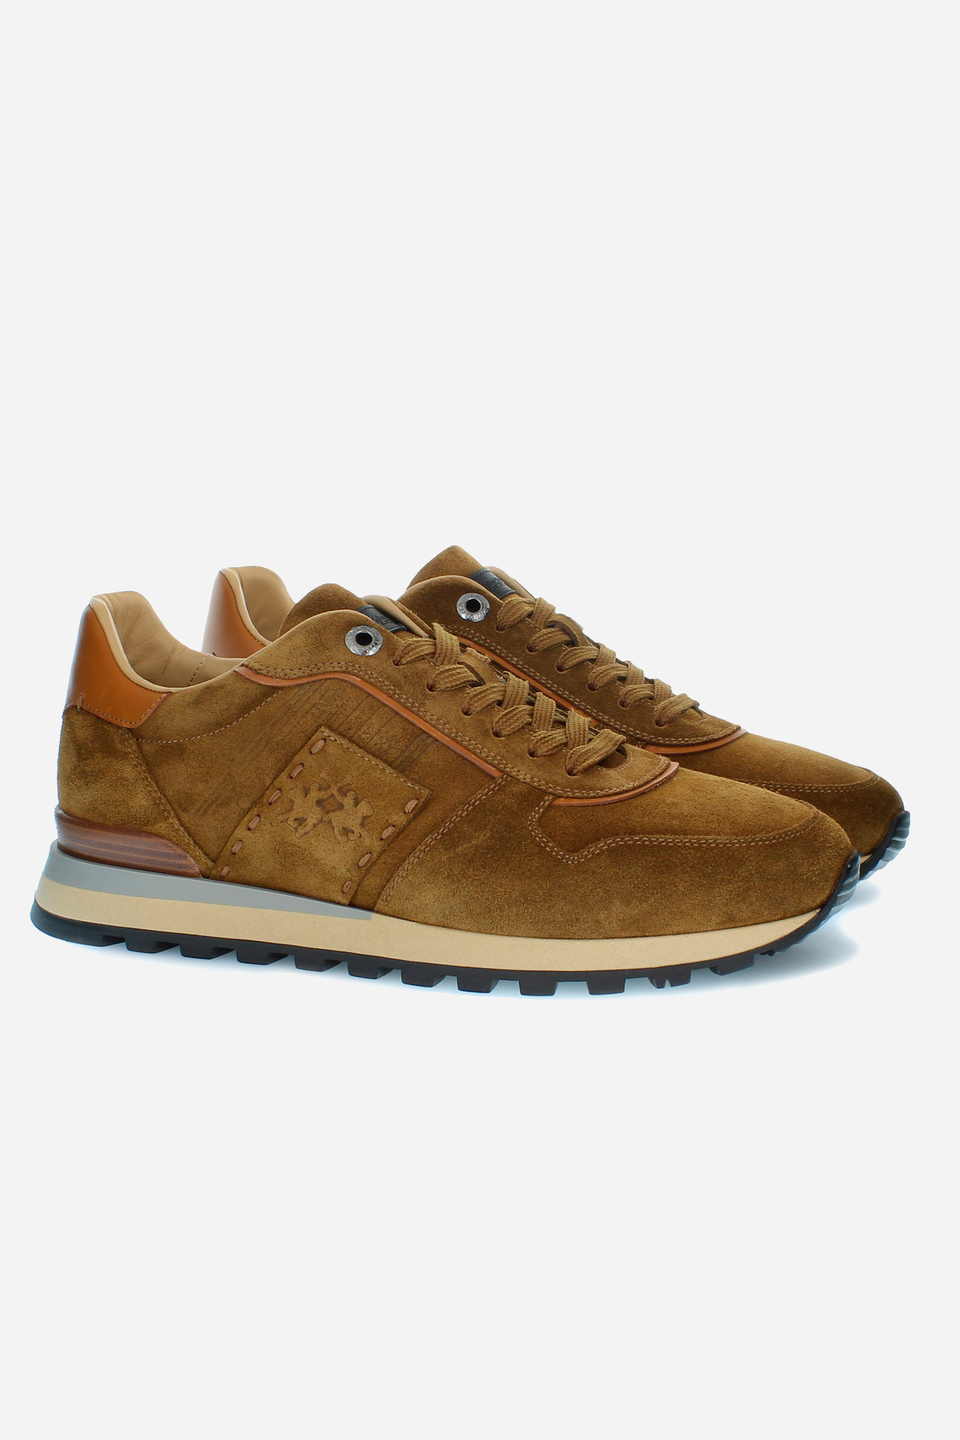 Men’s sneaker in suede and leather inserts | La Martina - Official Online Shop